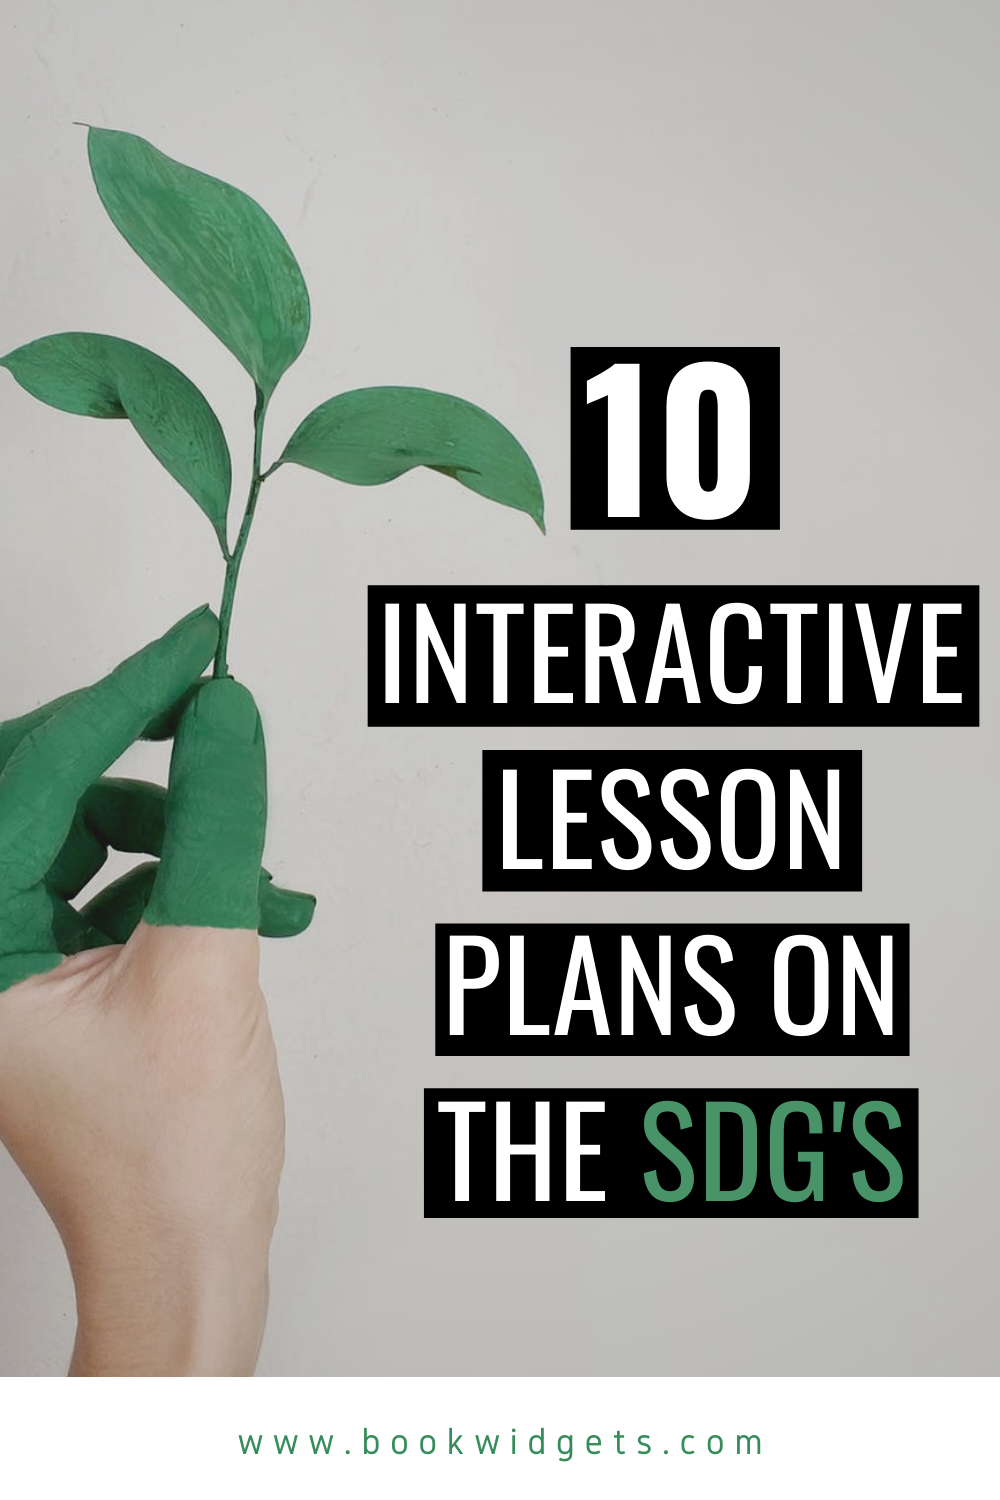 ready-to-use lesson plans on SDG’s